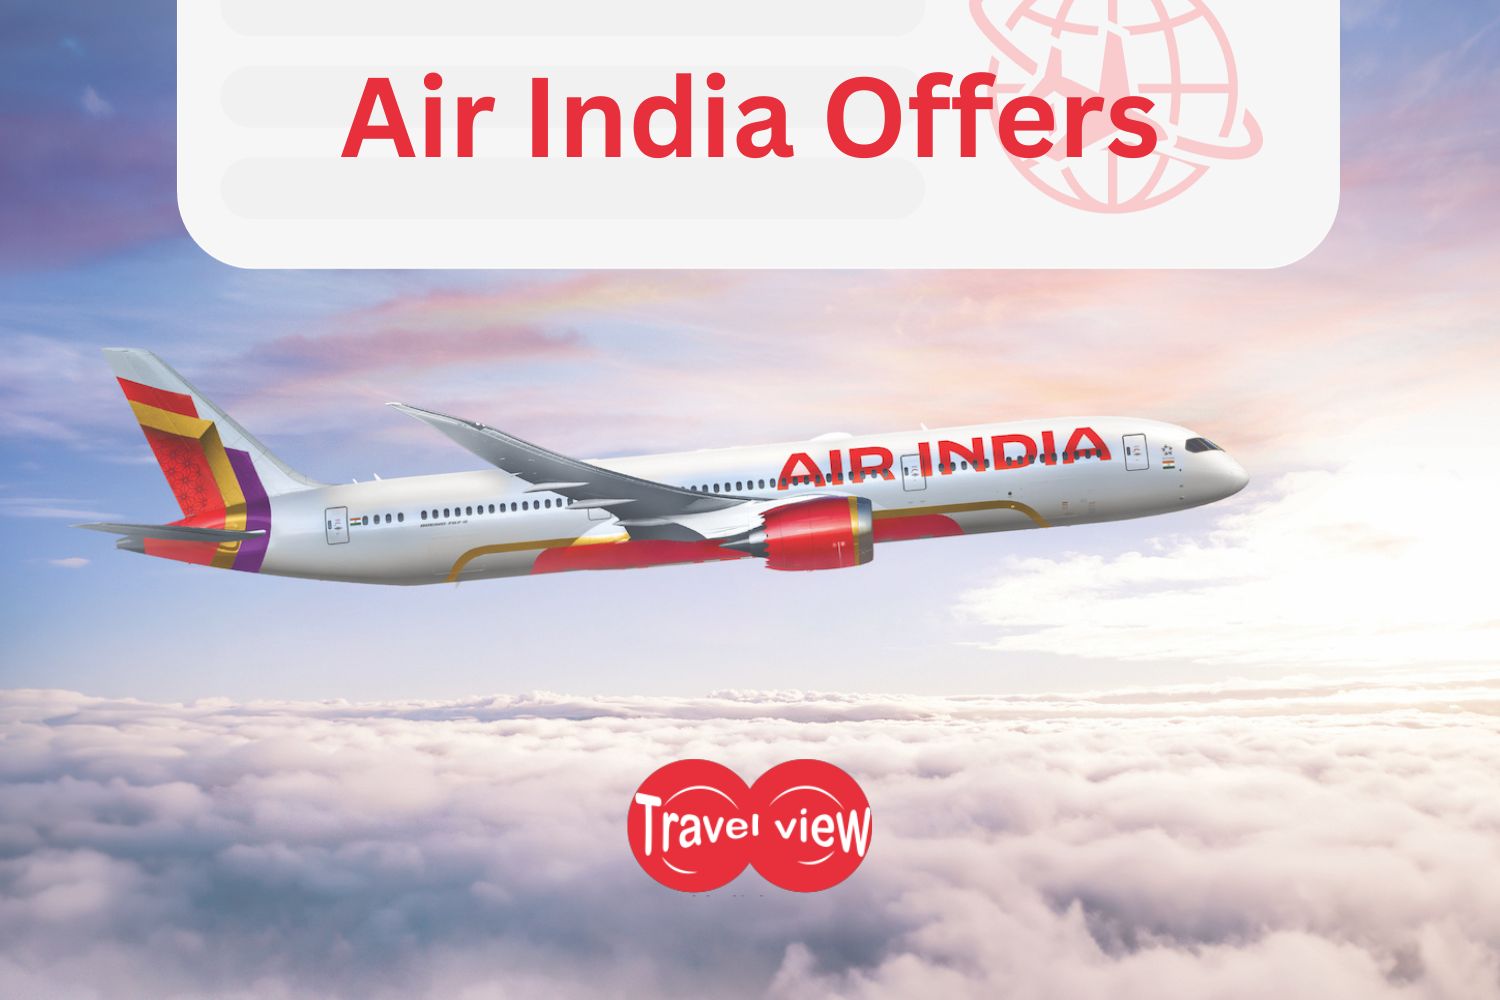 Travel View Flight Offers Air India